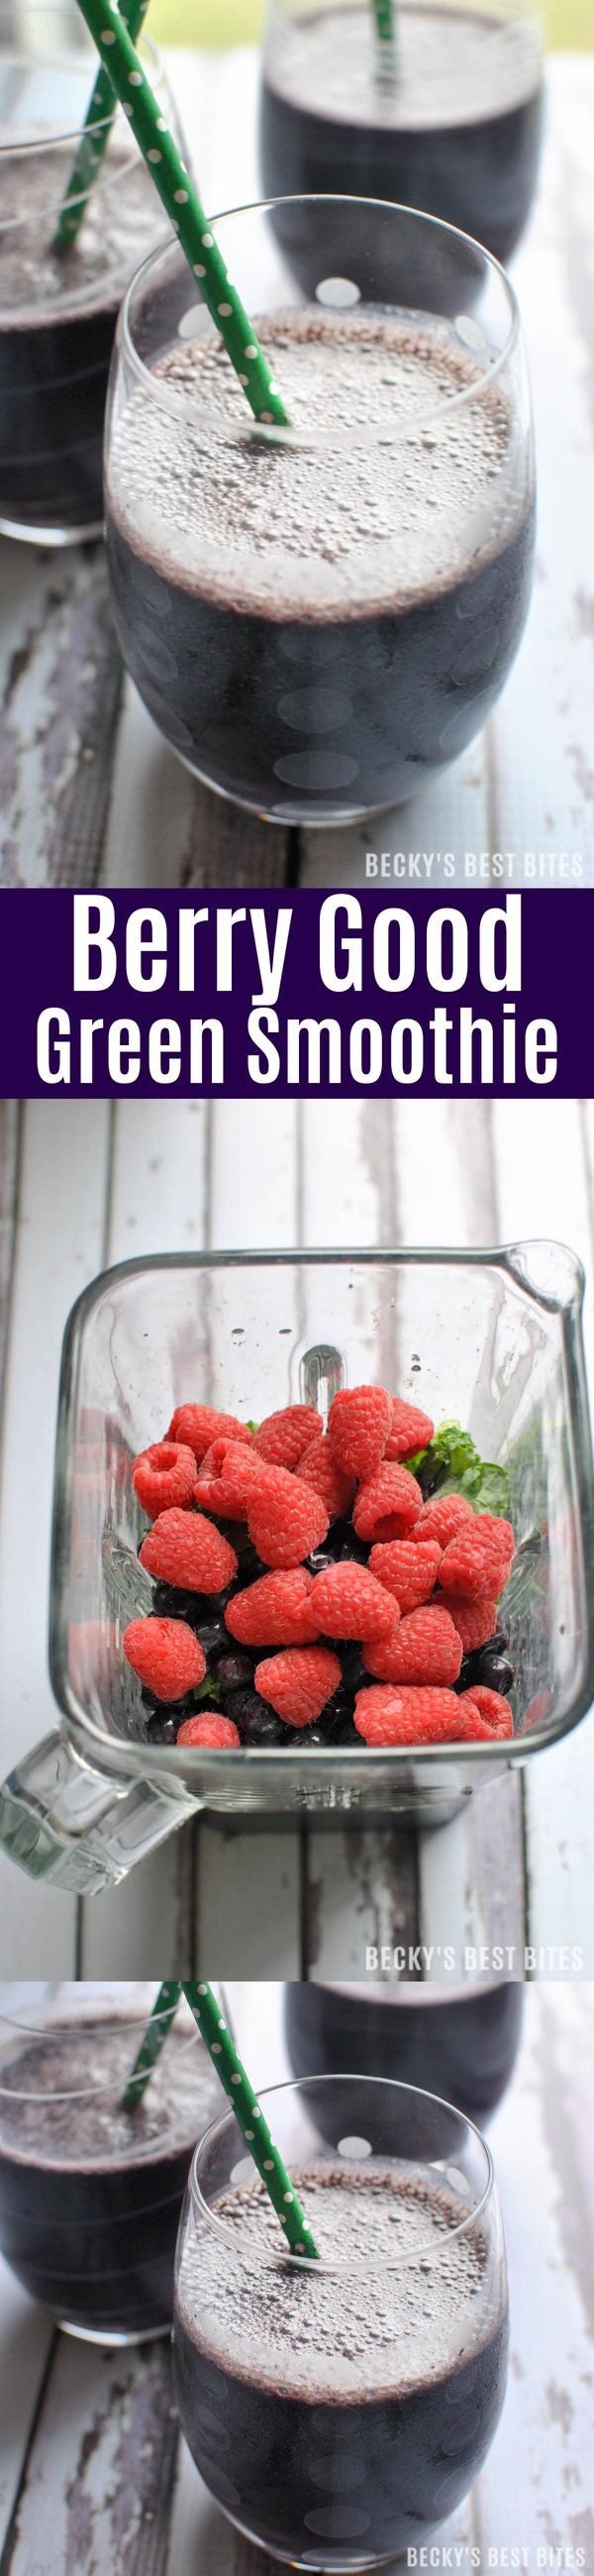 Berry Good Green Smoothie